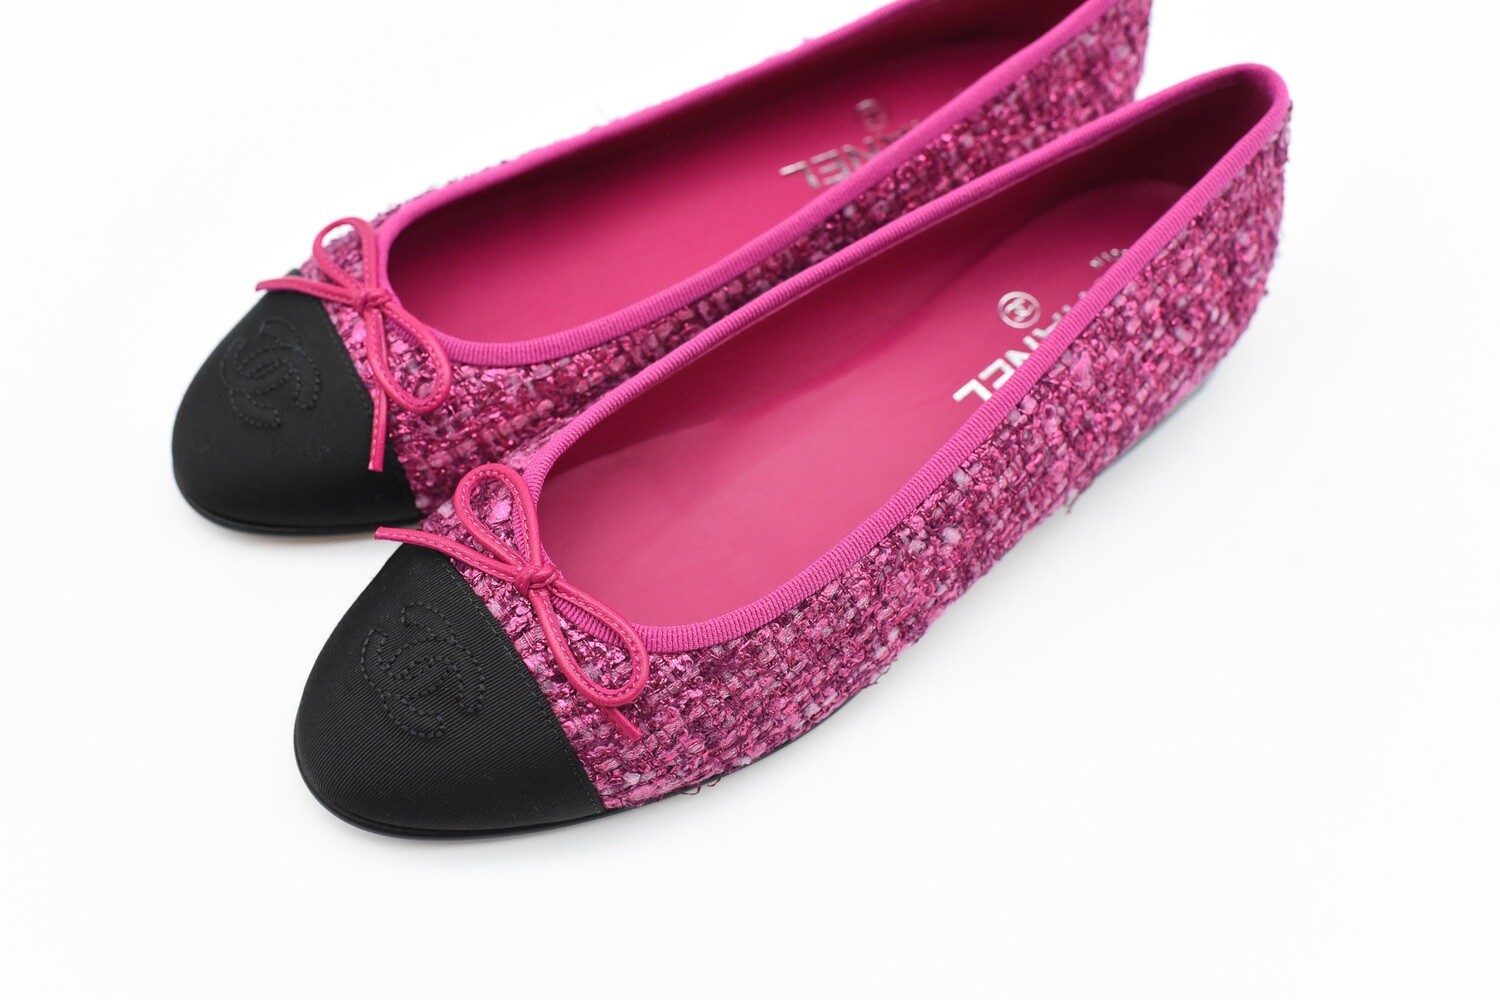 Chanel Shoes Ballet Flats, Dark Pink Tweed, Size 39.5, New in Box GA006